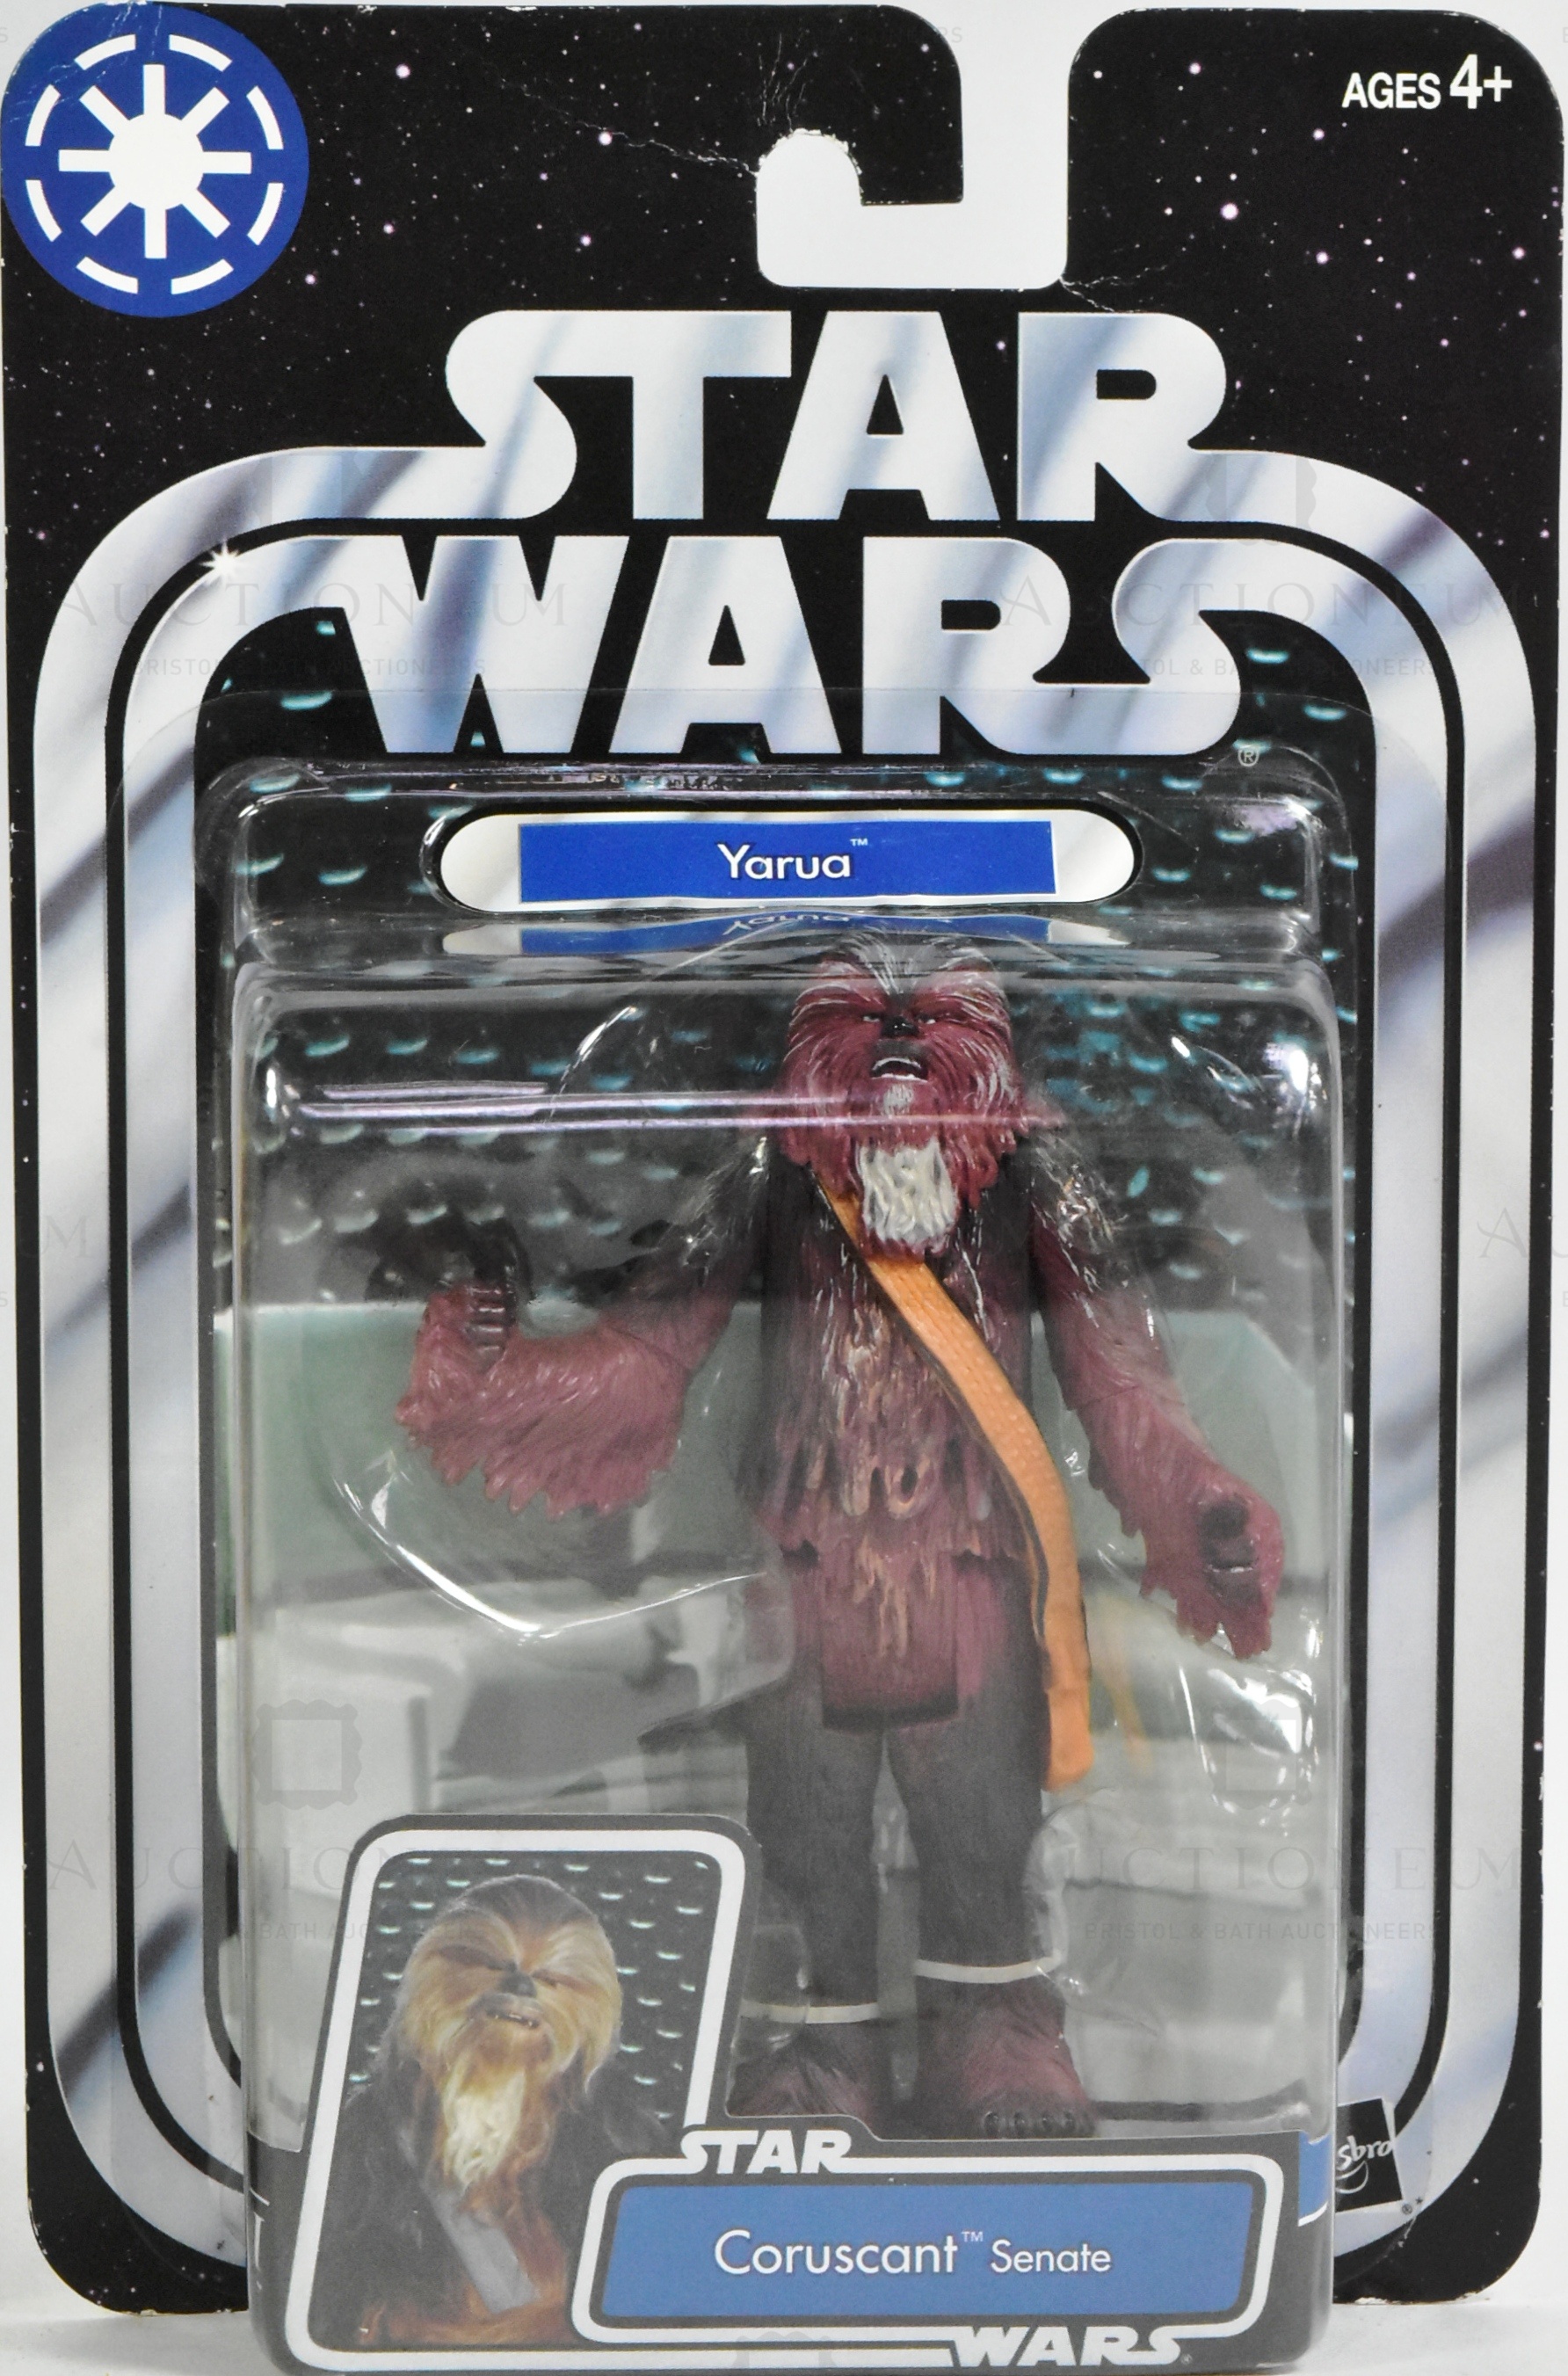 STAR WARS - 2004 COLLECTION OF CARDED ACTION FIGURES - Image 5 of 5